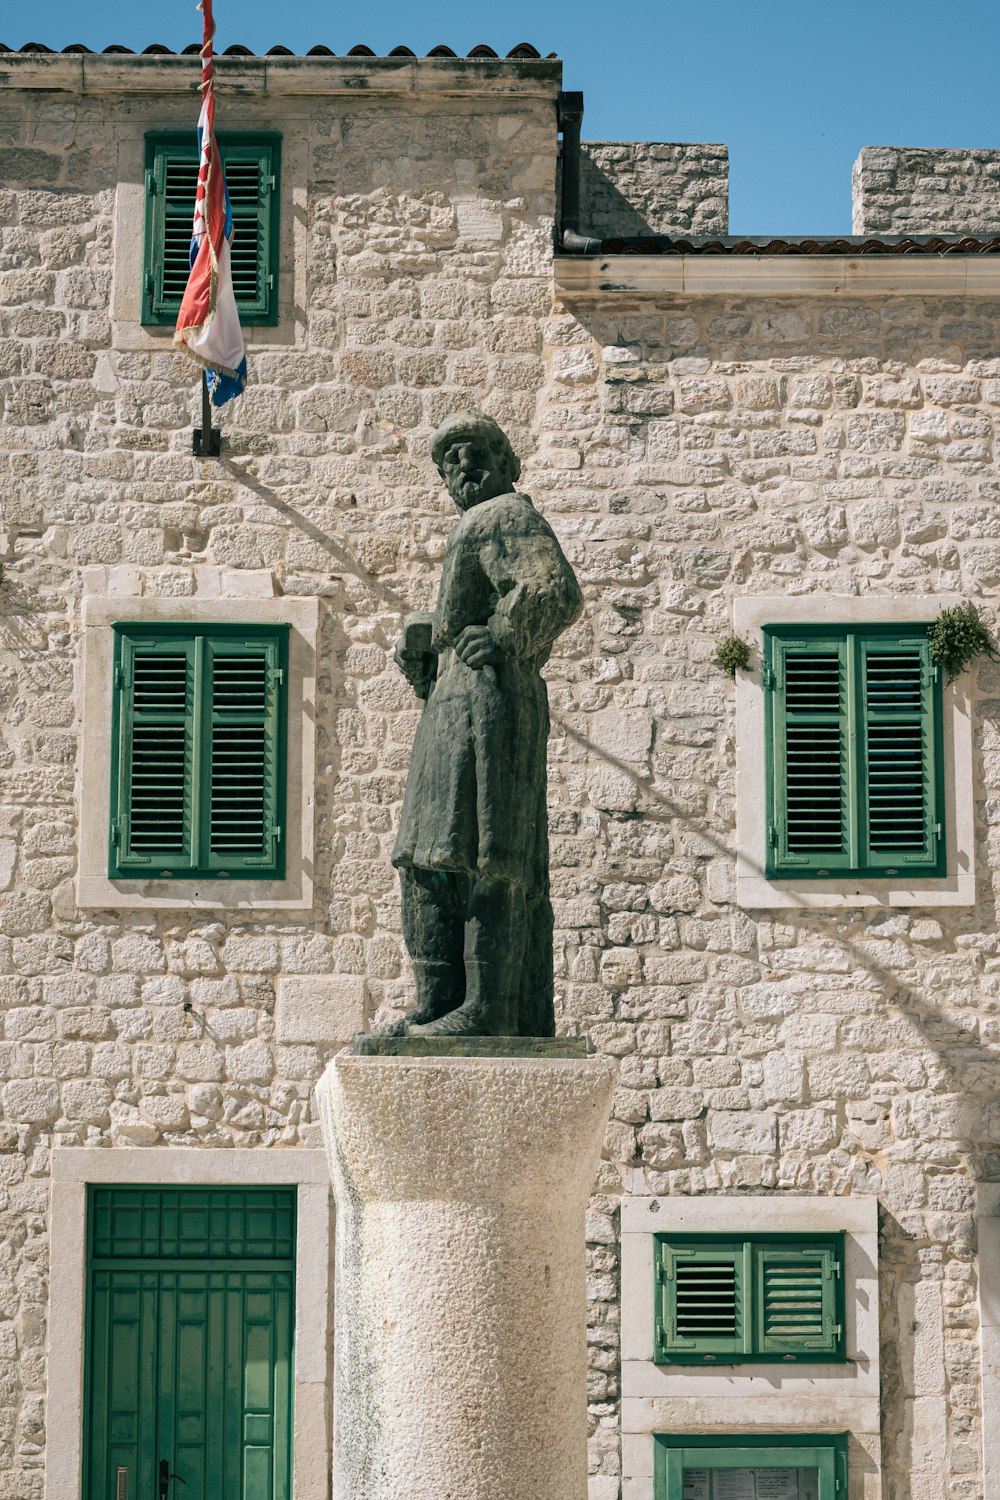 a statue of a man standing in front of a building